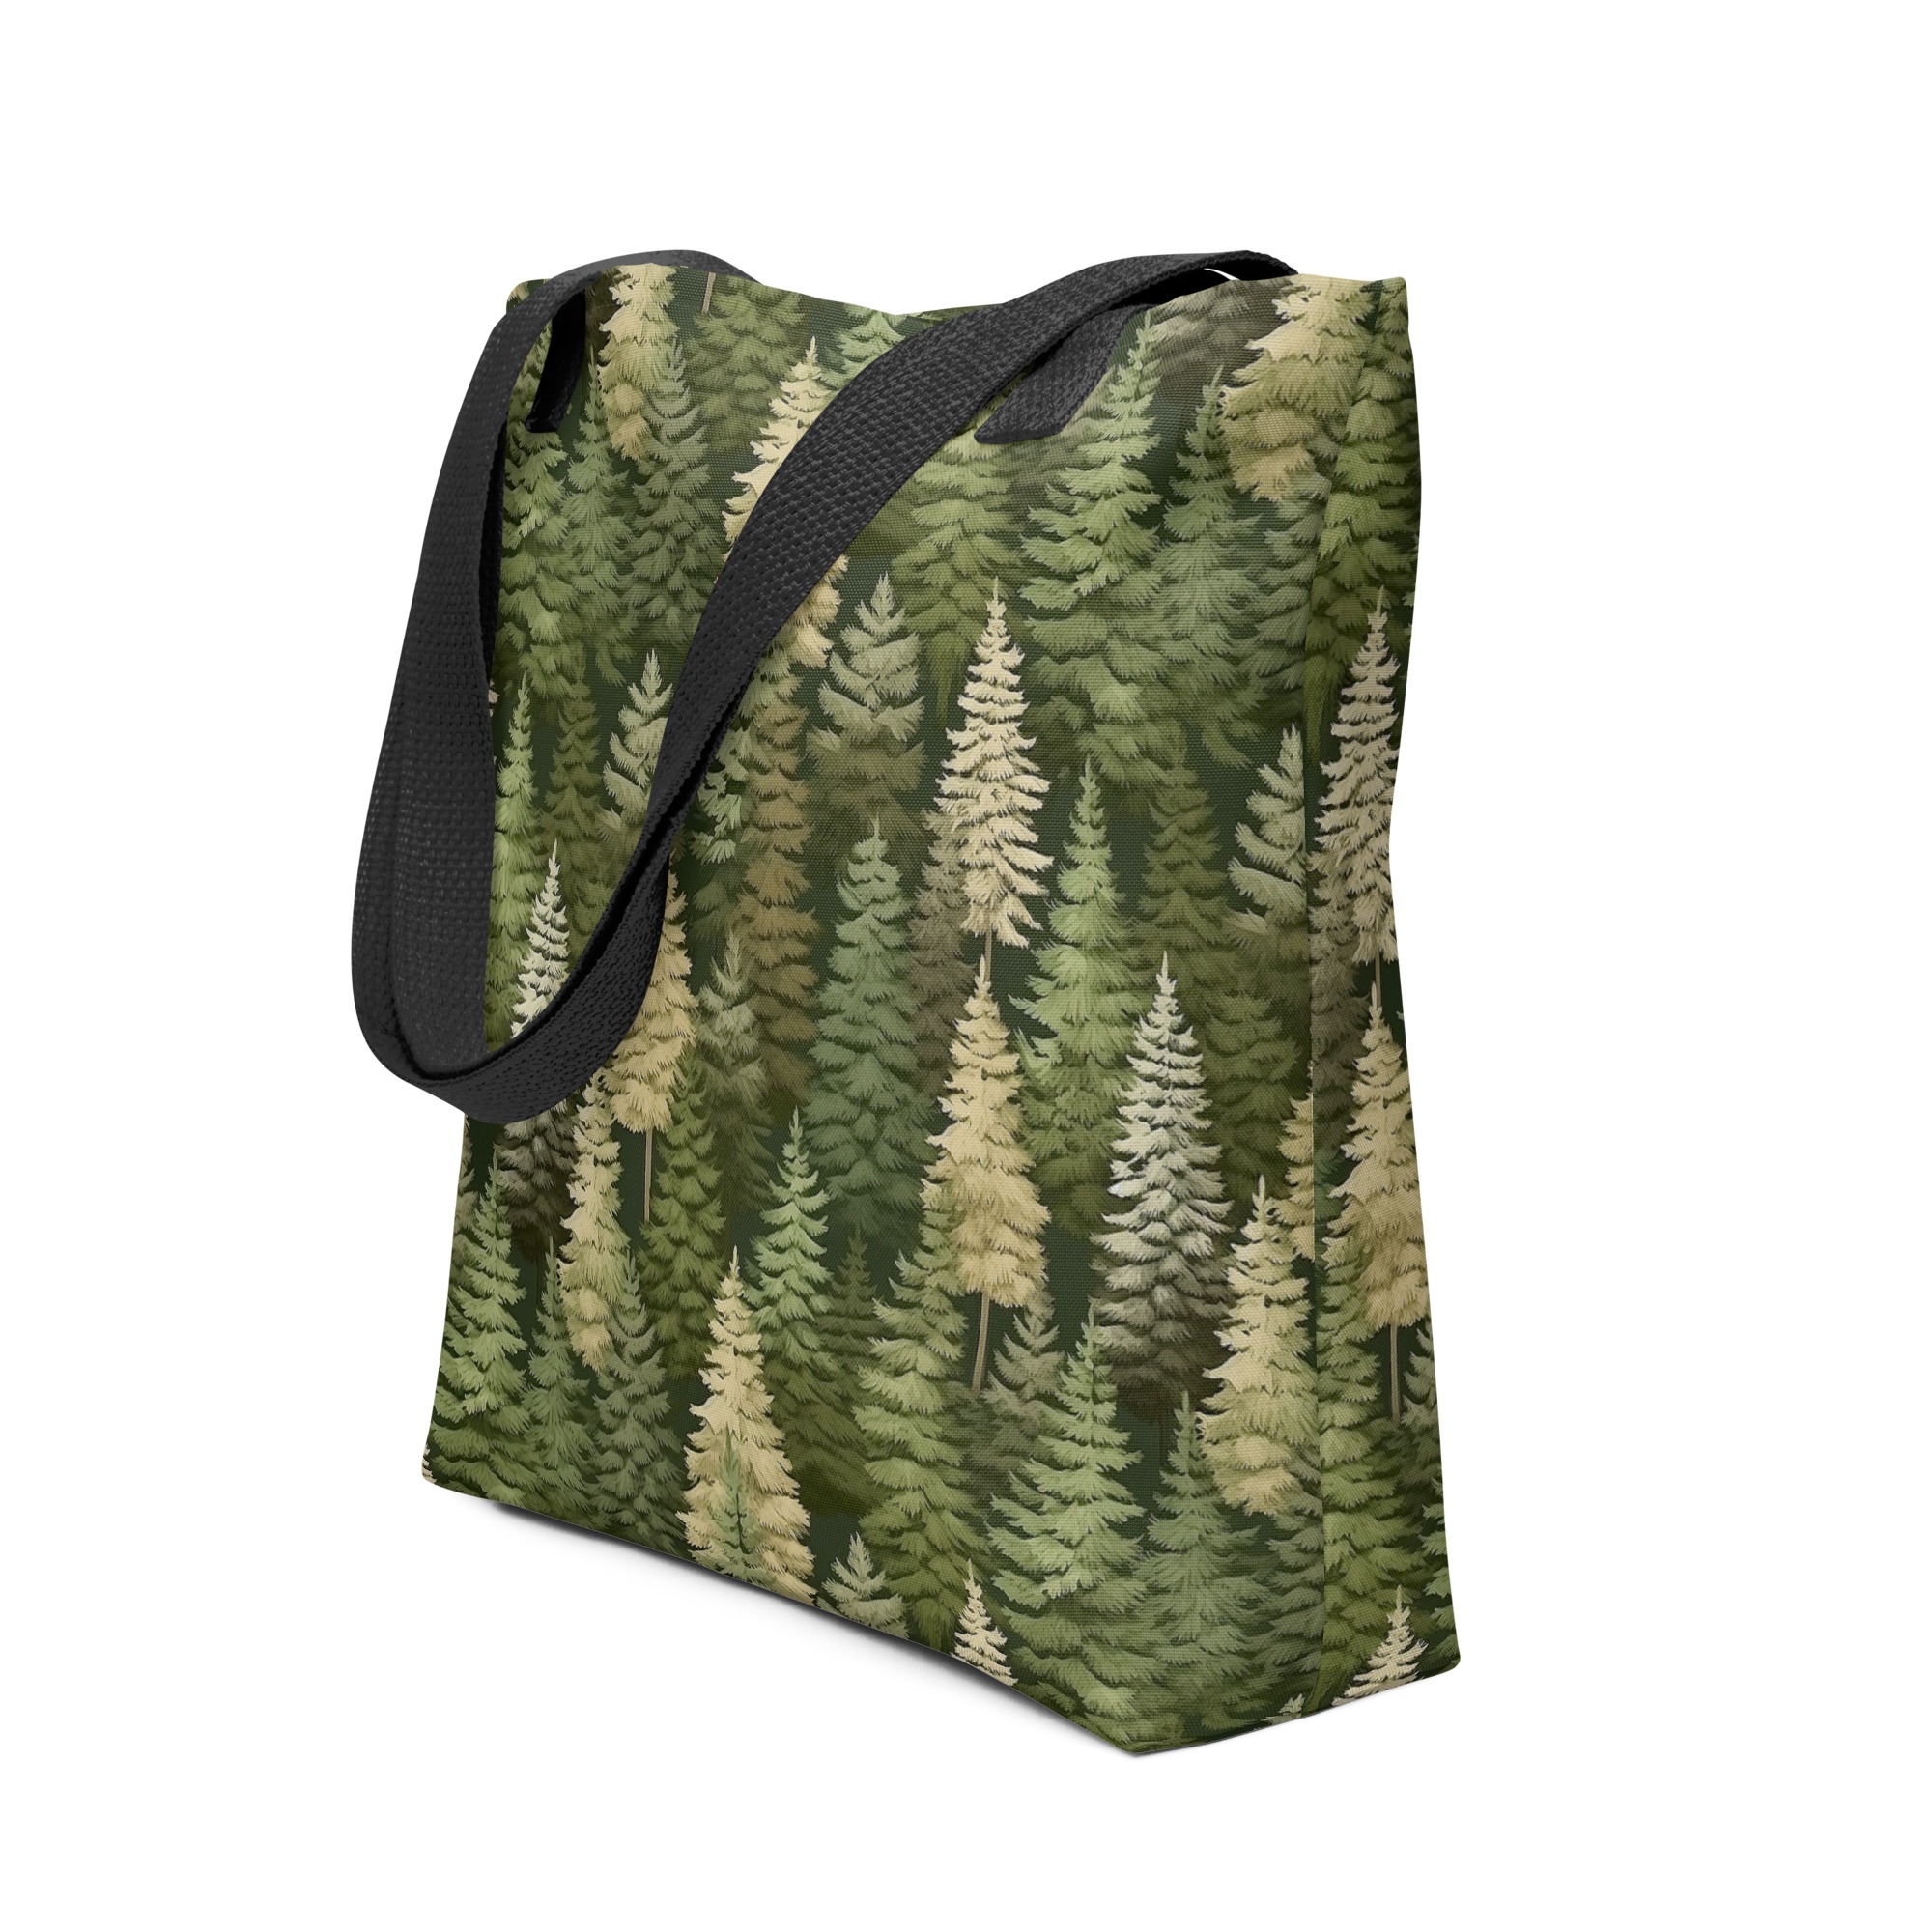 I Can See the Forest for the Trees | Pine Tree Forest Pattern | All Over Print Tote Bag